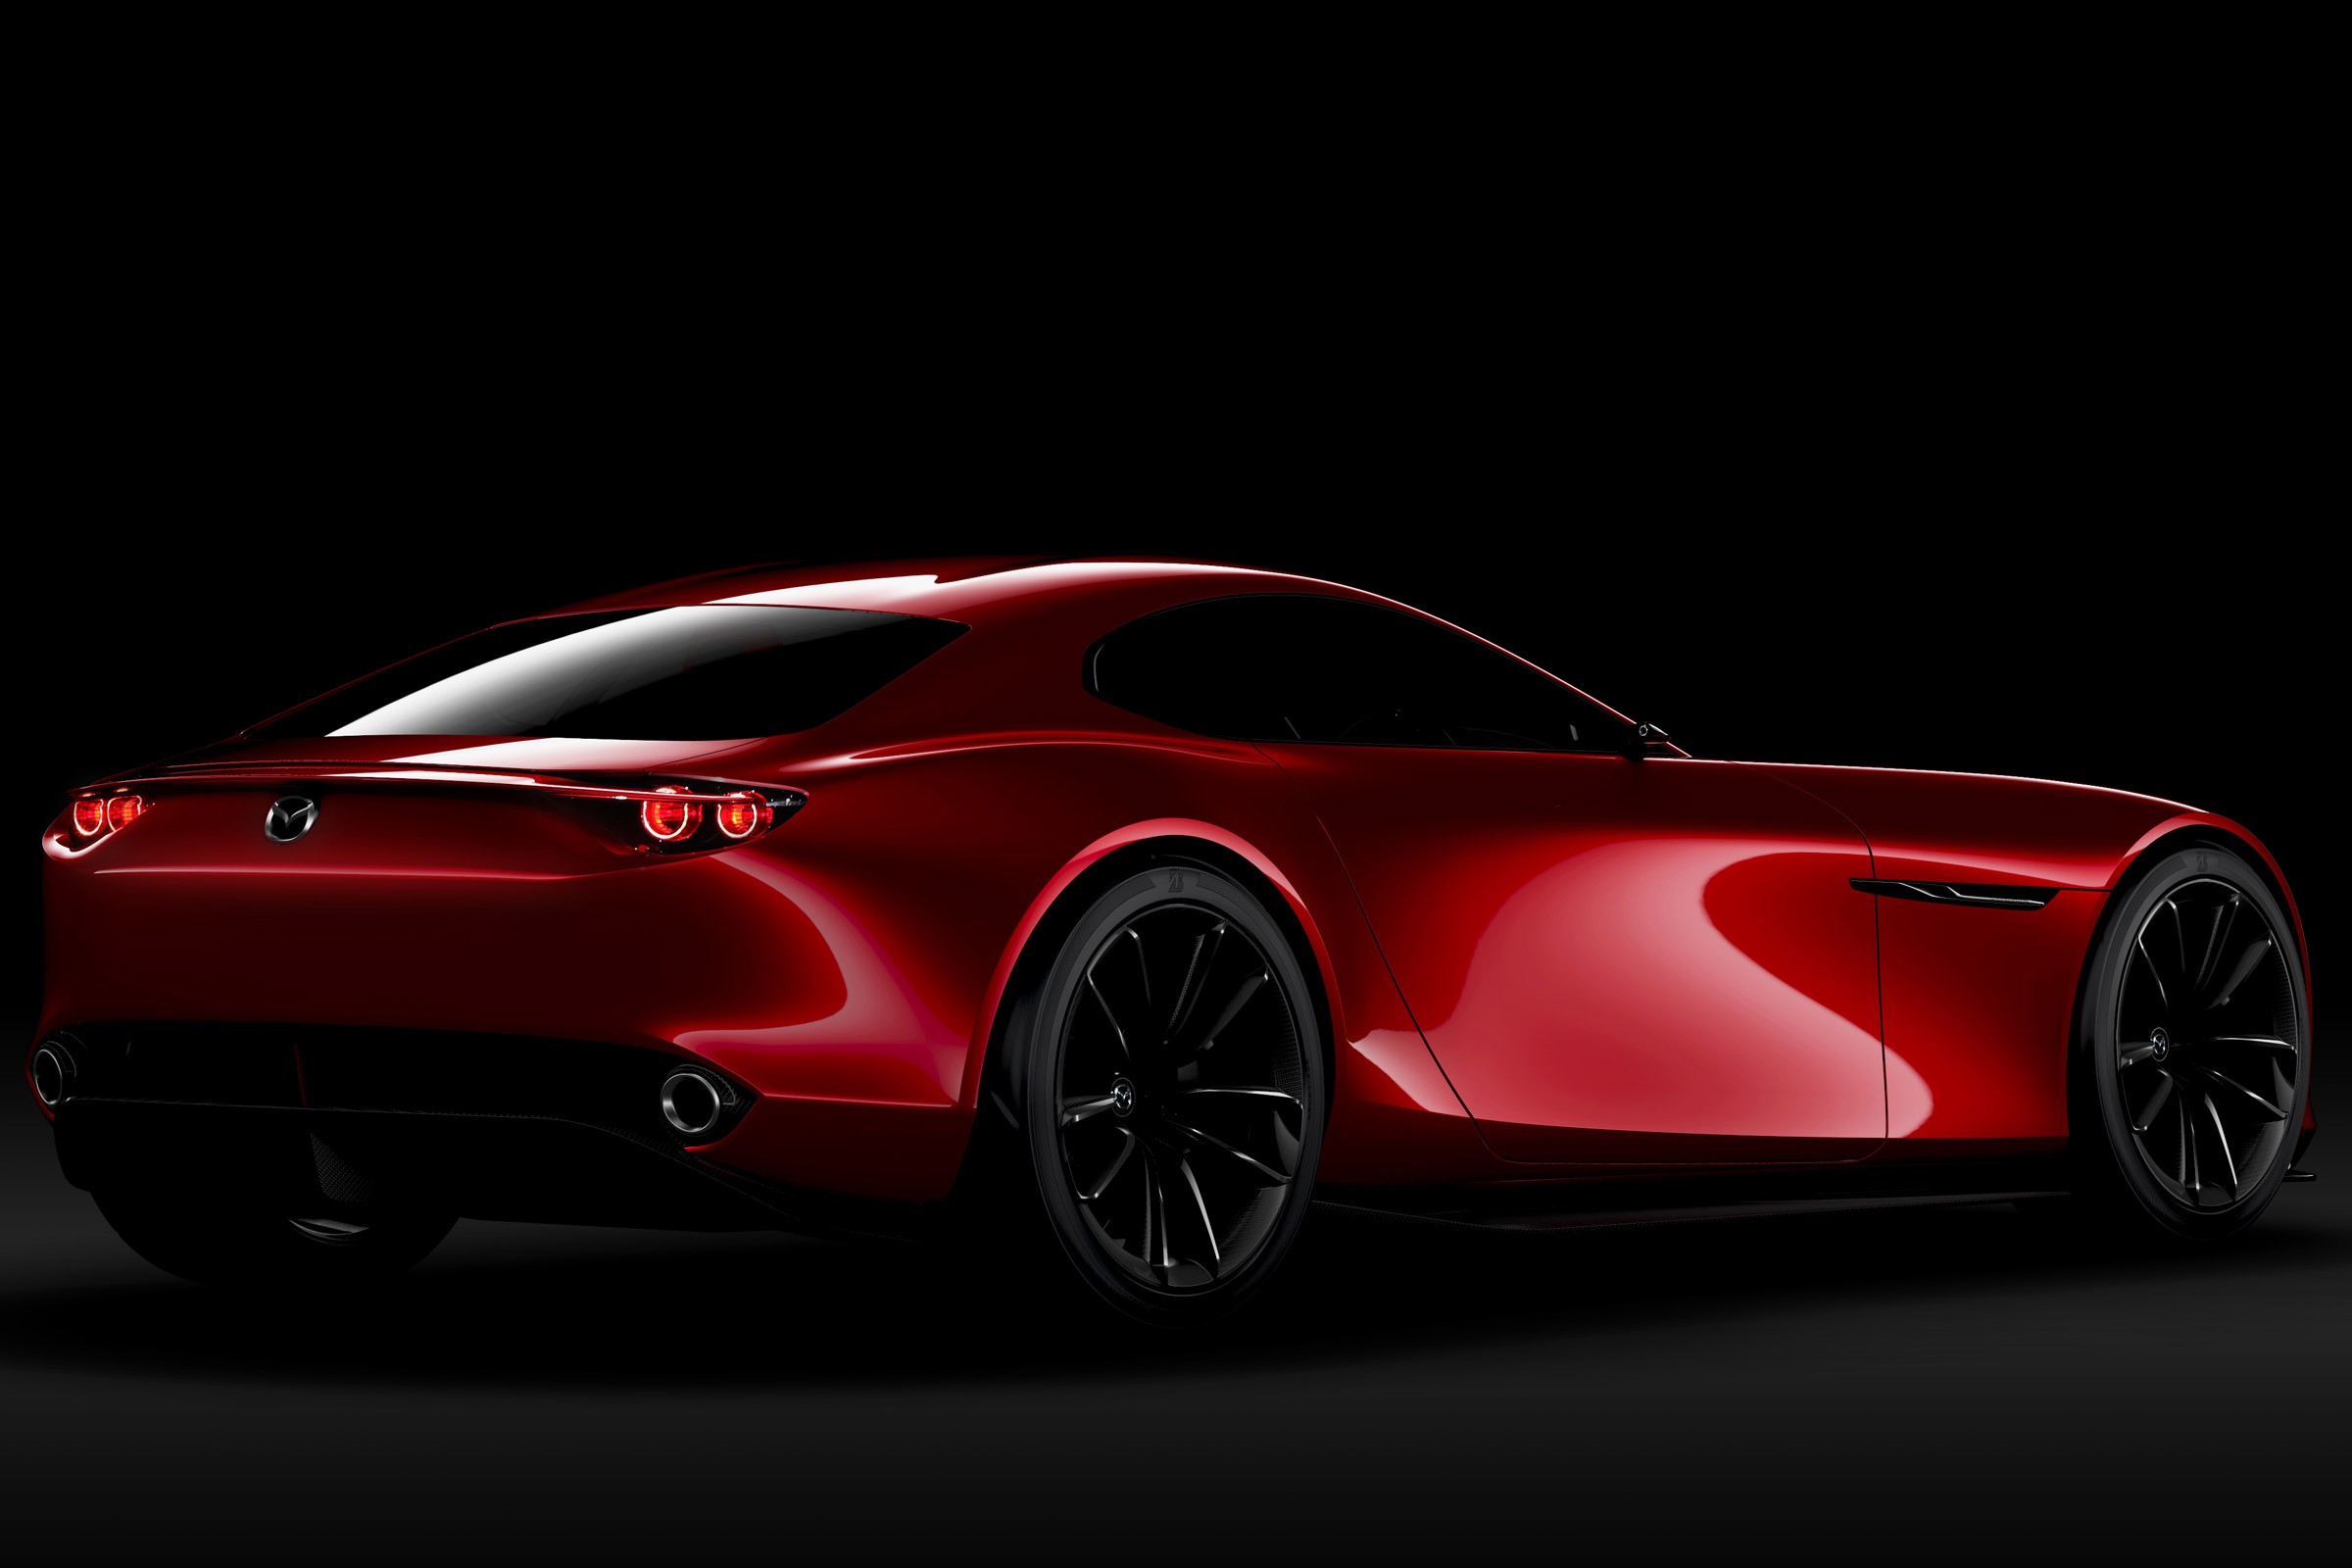 General 2400x1600 vehicle car concept cars Roadster Mazda Japanese Mazda RX-Vision digital art CGI black background supercars rotary engines red cars